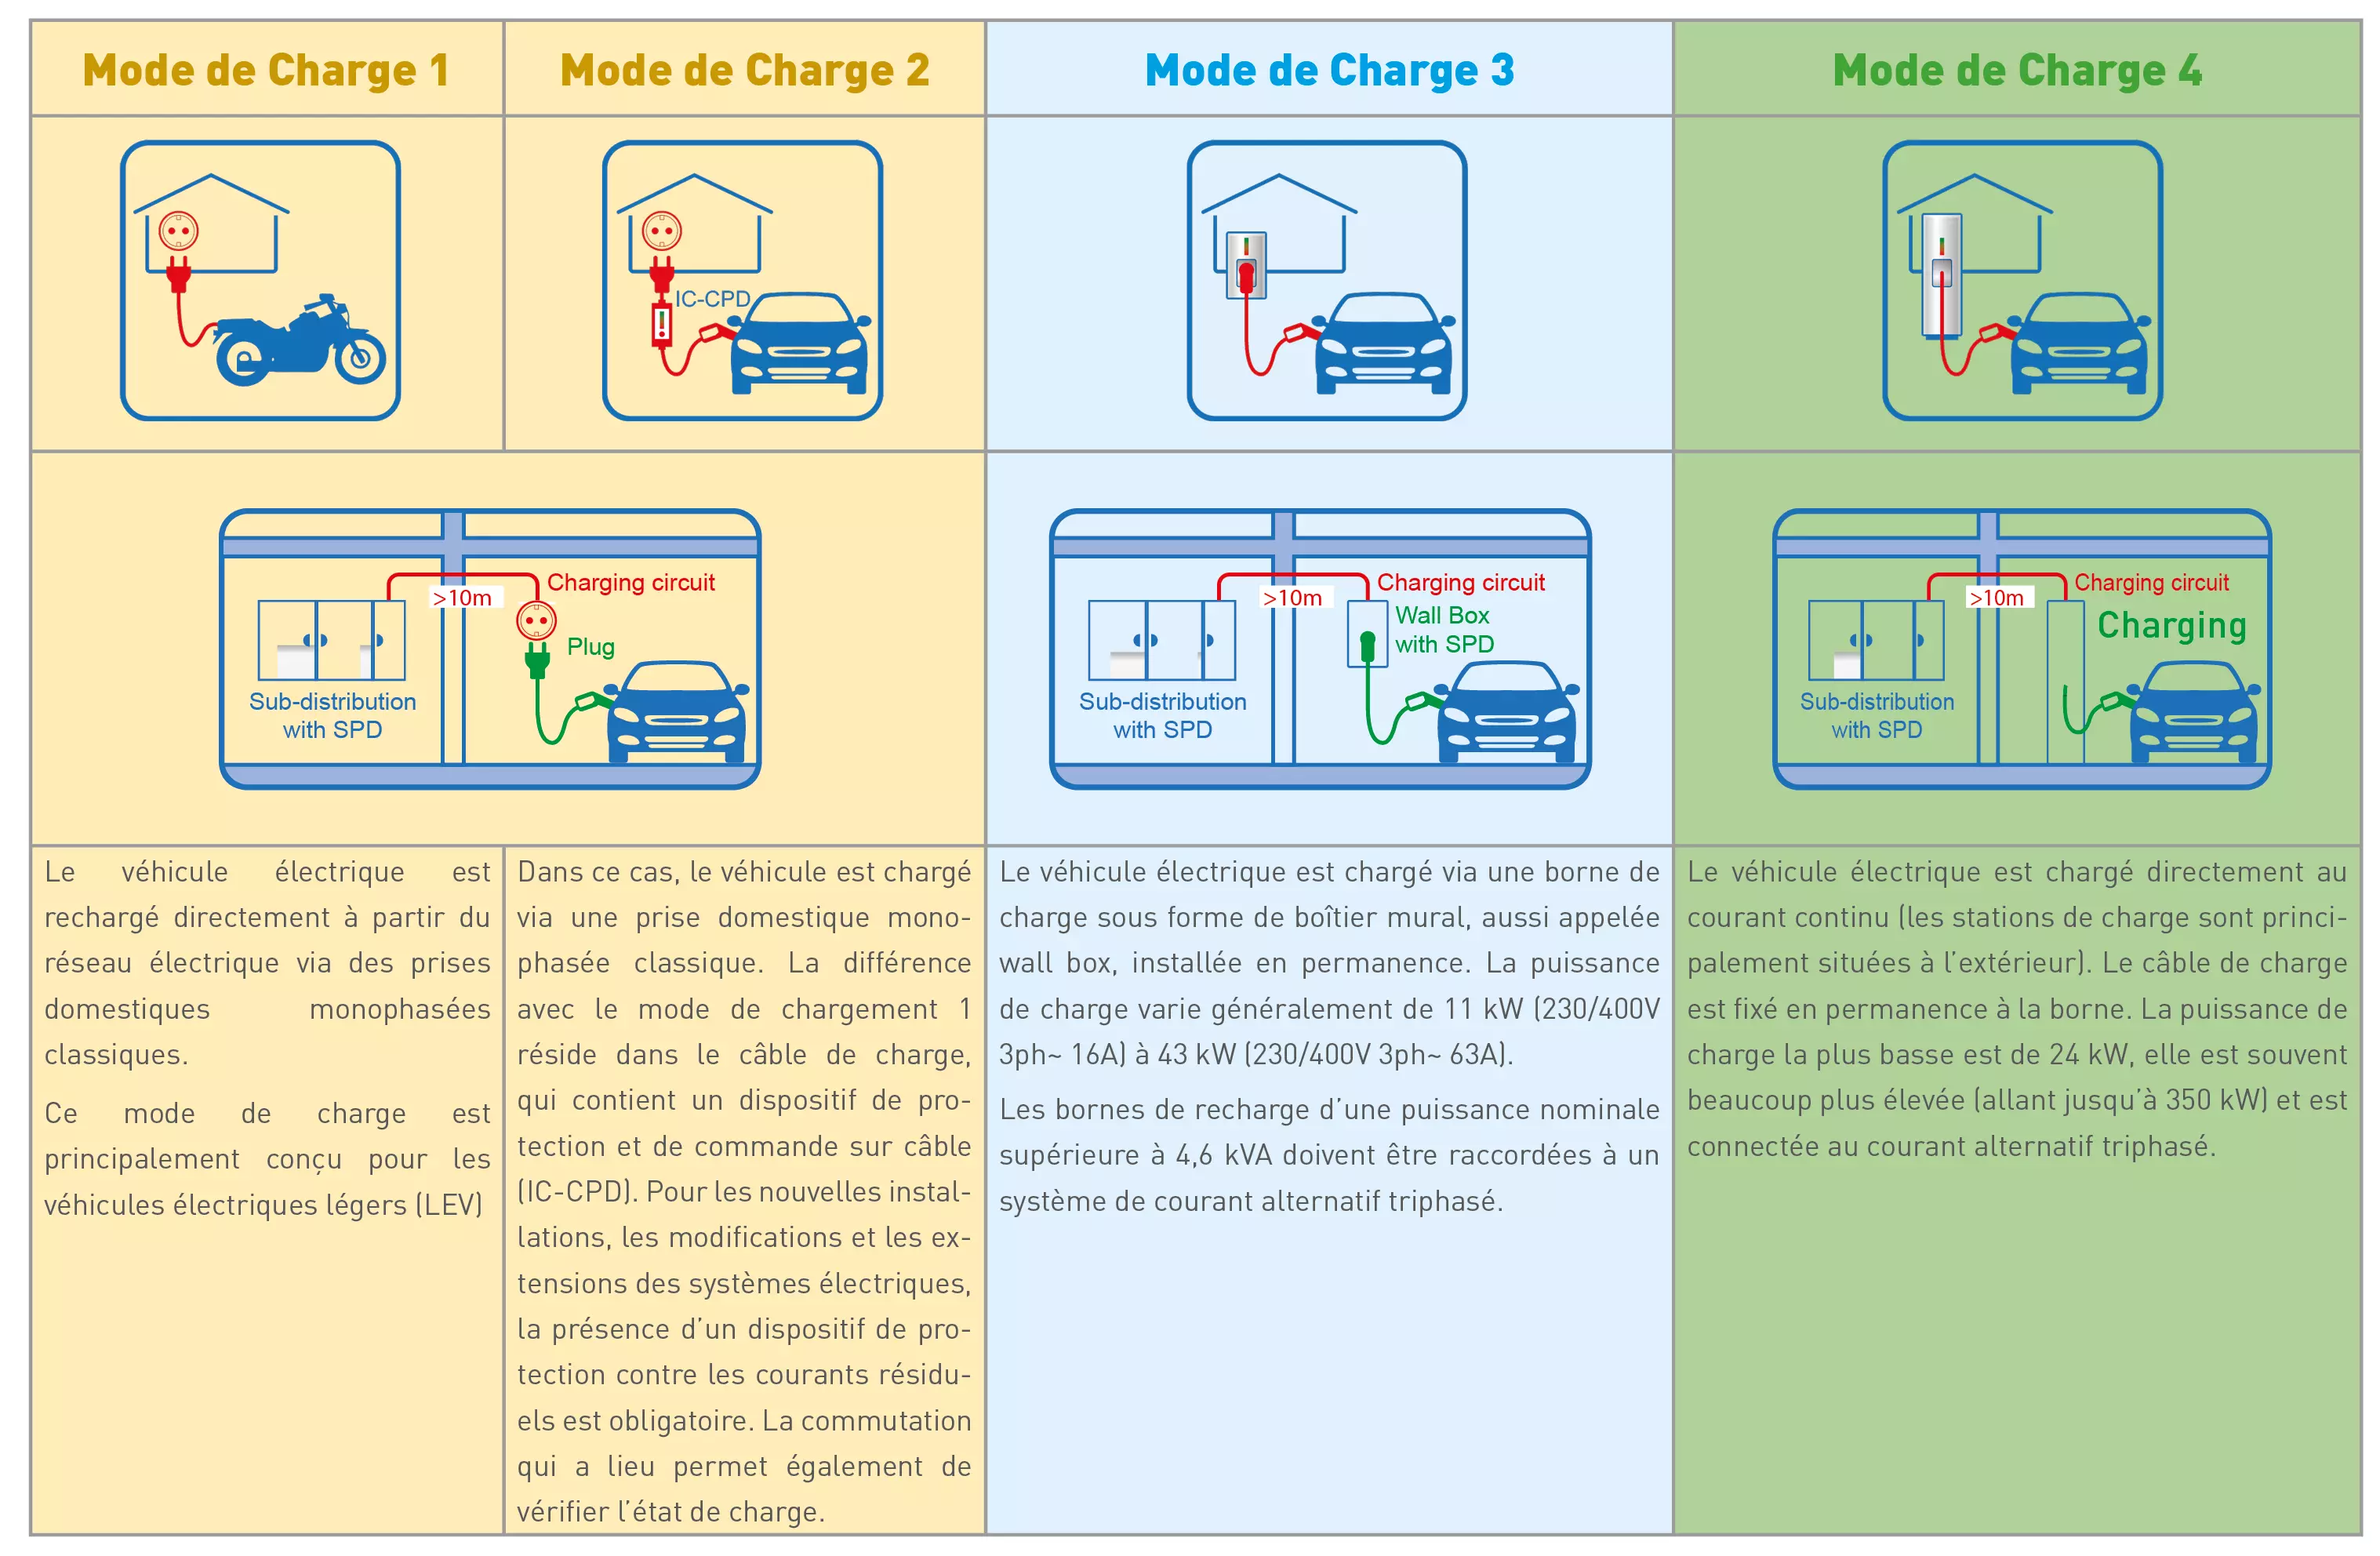 Mode de charge IRVE